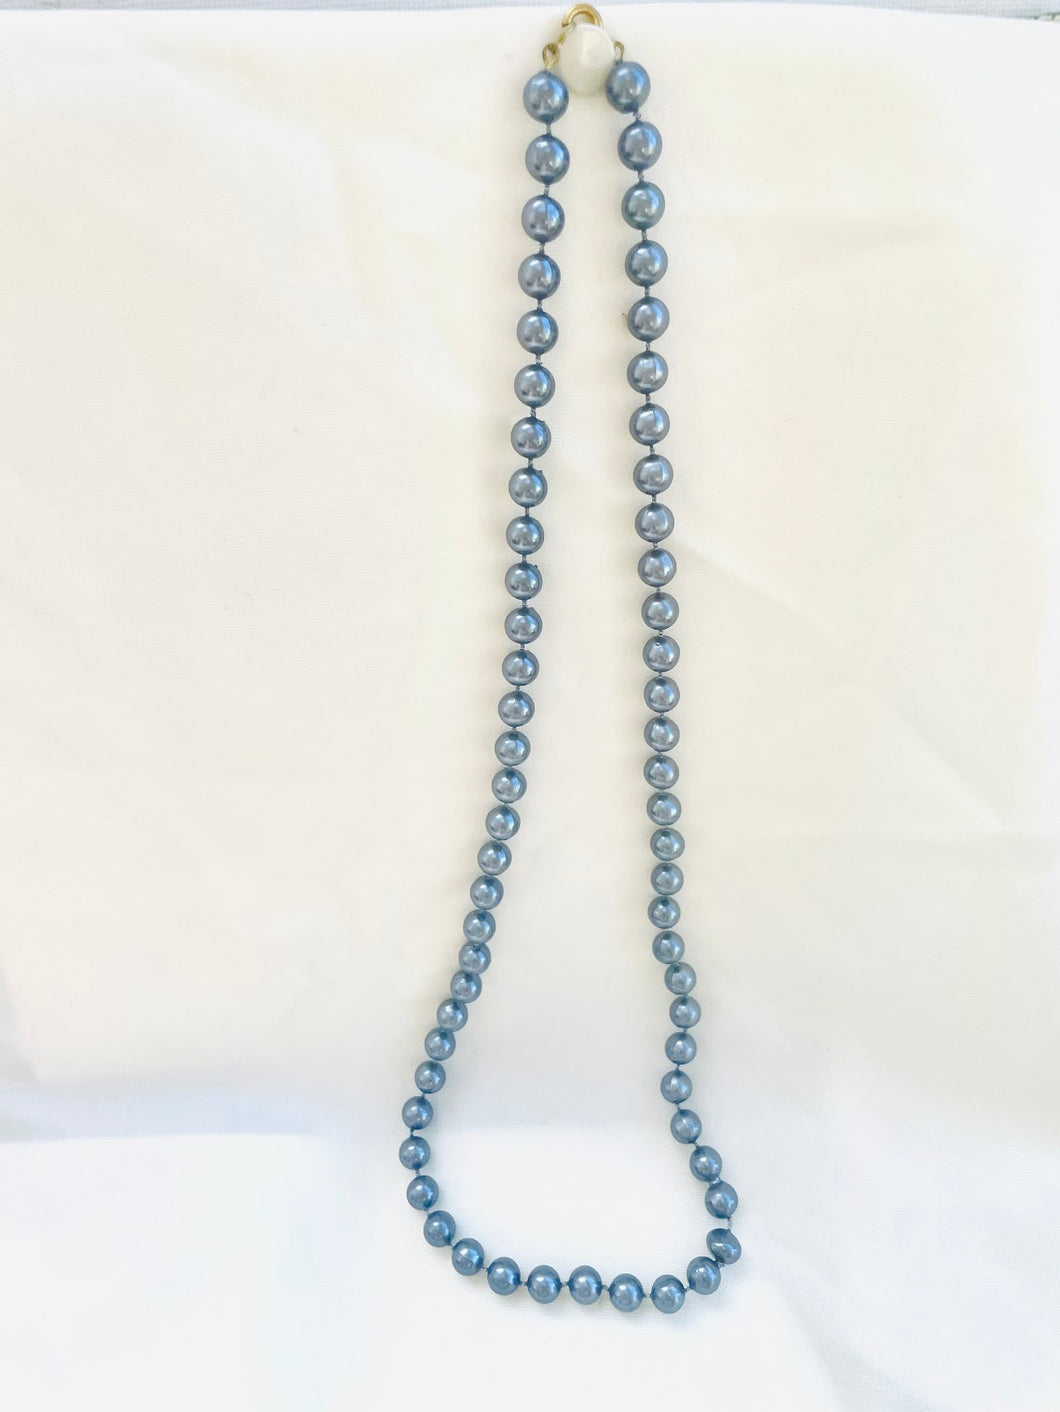 Single Strand Grey Faux Pearl Necklace, Blue-grey Pearls, Icy Blue Necklace